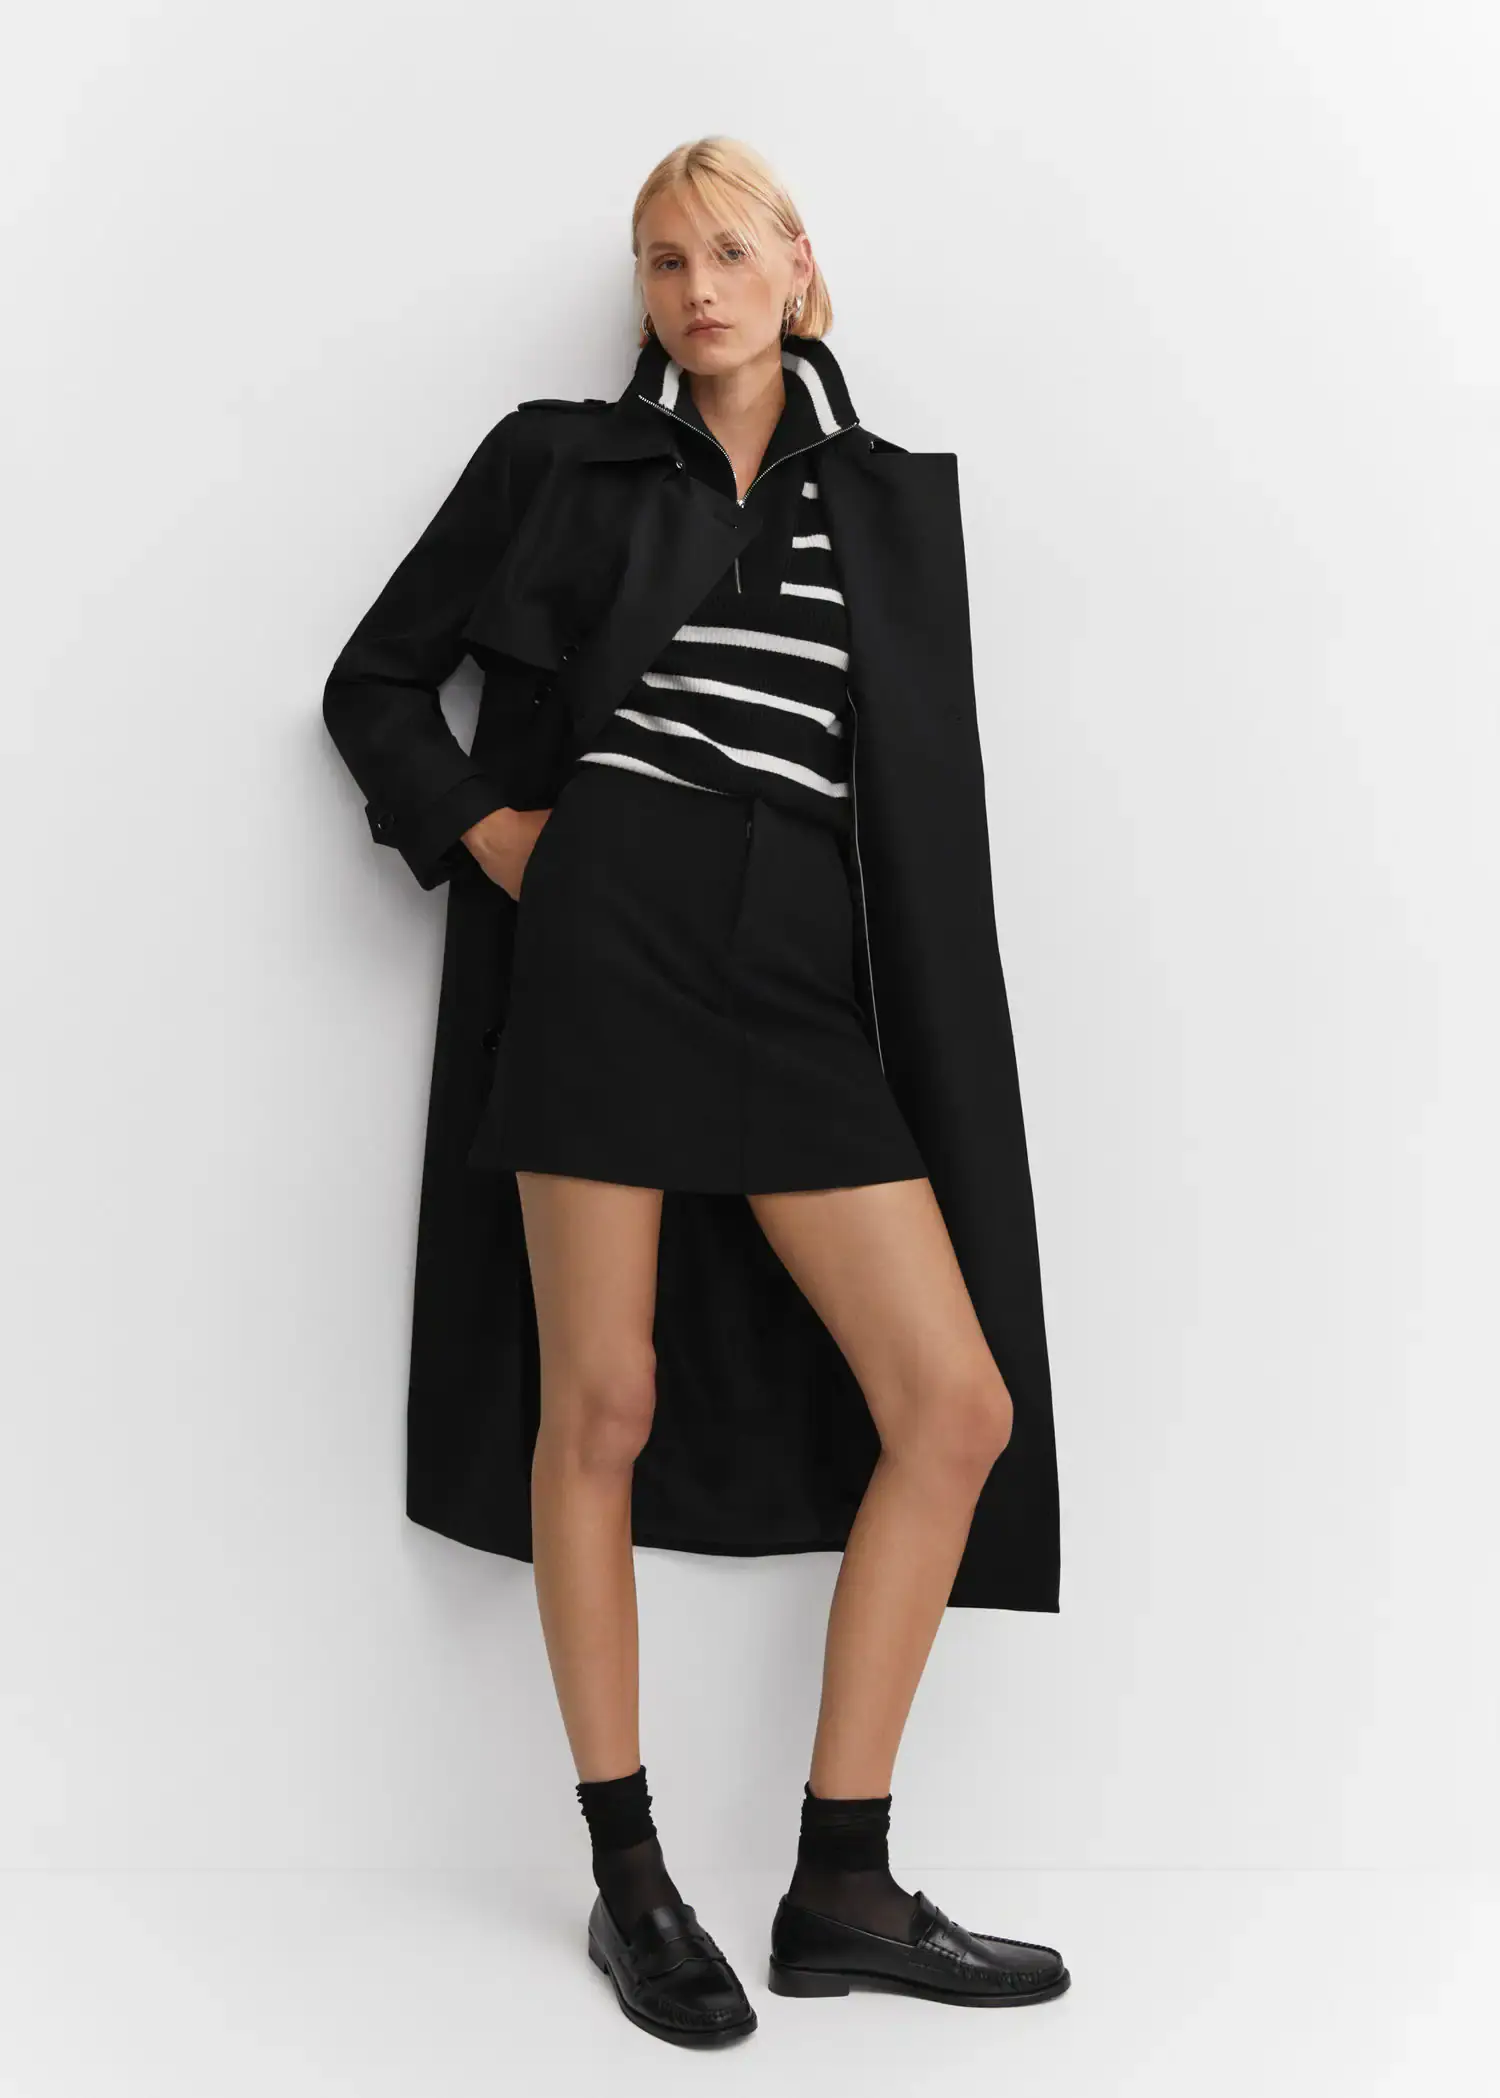 Mango Waterproof double-breasted trench coat. 1